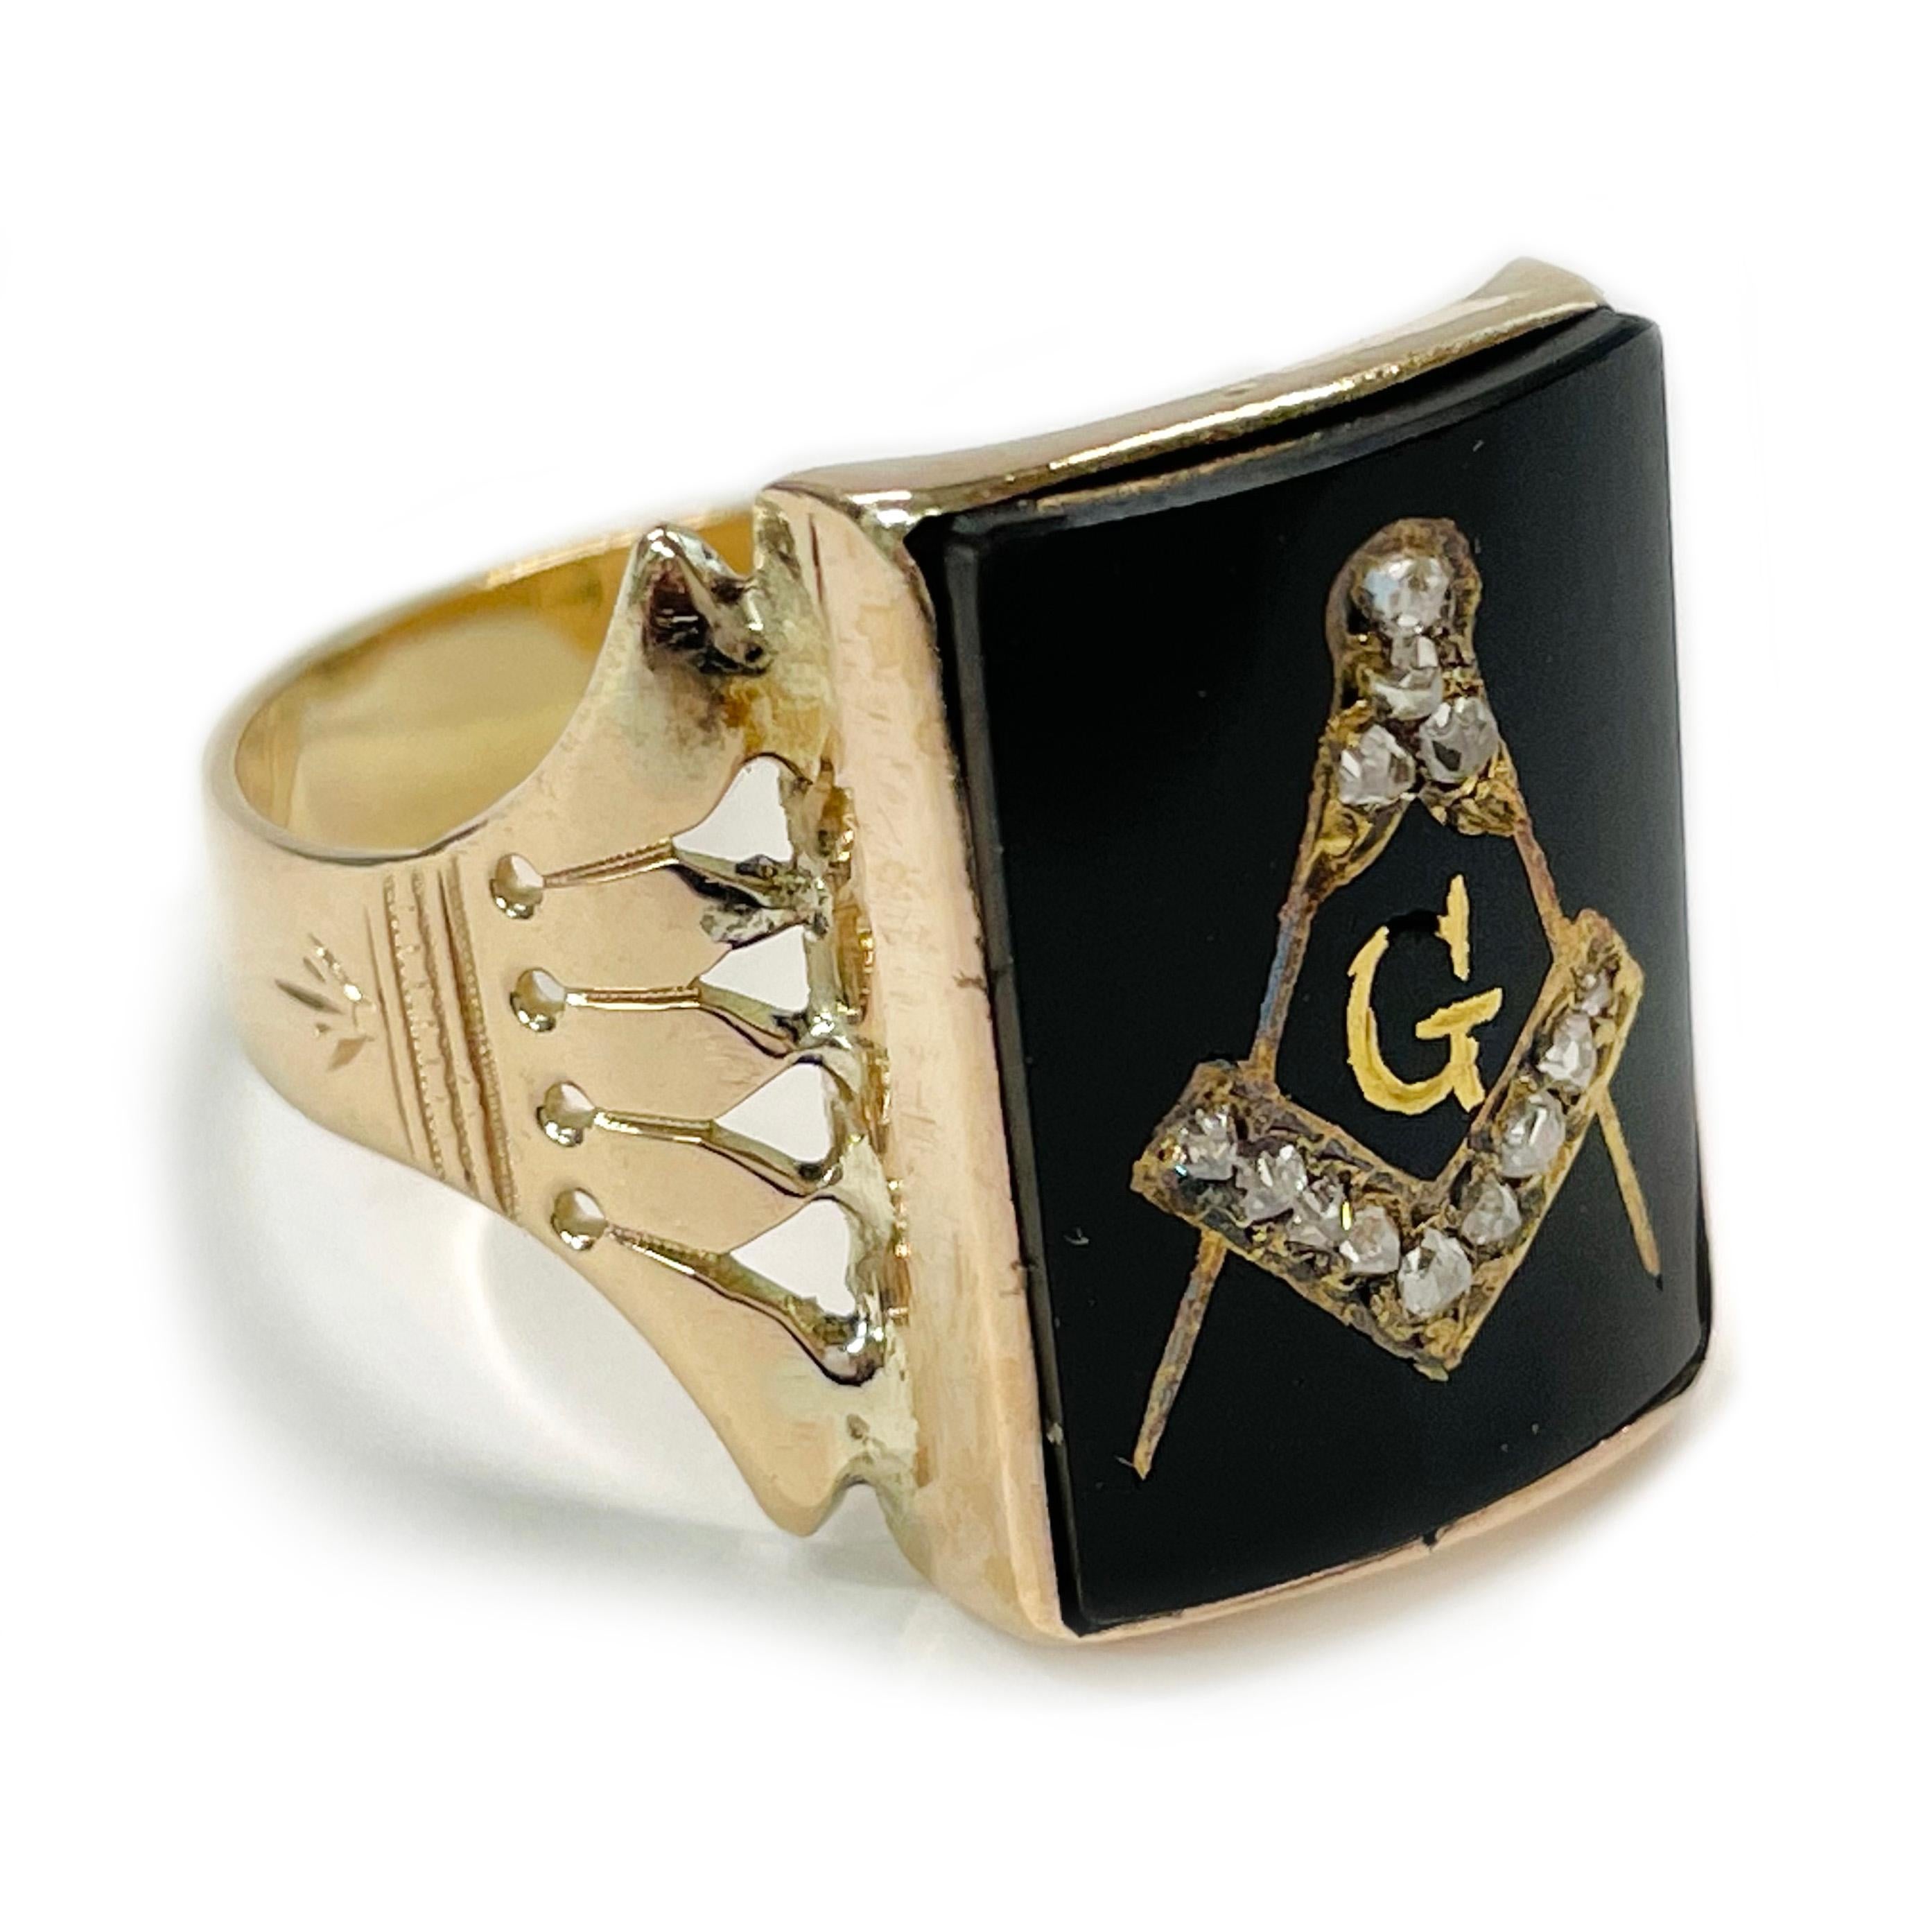 14 Karat Antique Masonic Yellow Gold Diamond Onyx Ring. This fantastic ring features a 18 x 13.3mm rectangular curved onyx stone with a carved and then gold gilded masonic logo and thirteen rough cut diamonds. The band has milgrain and diamond-cut